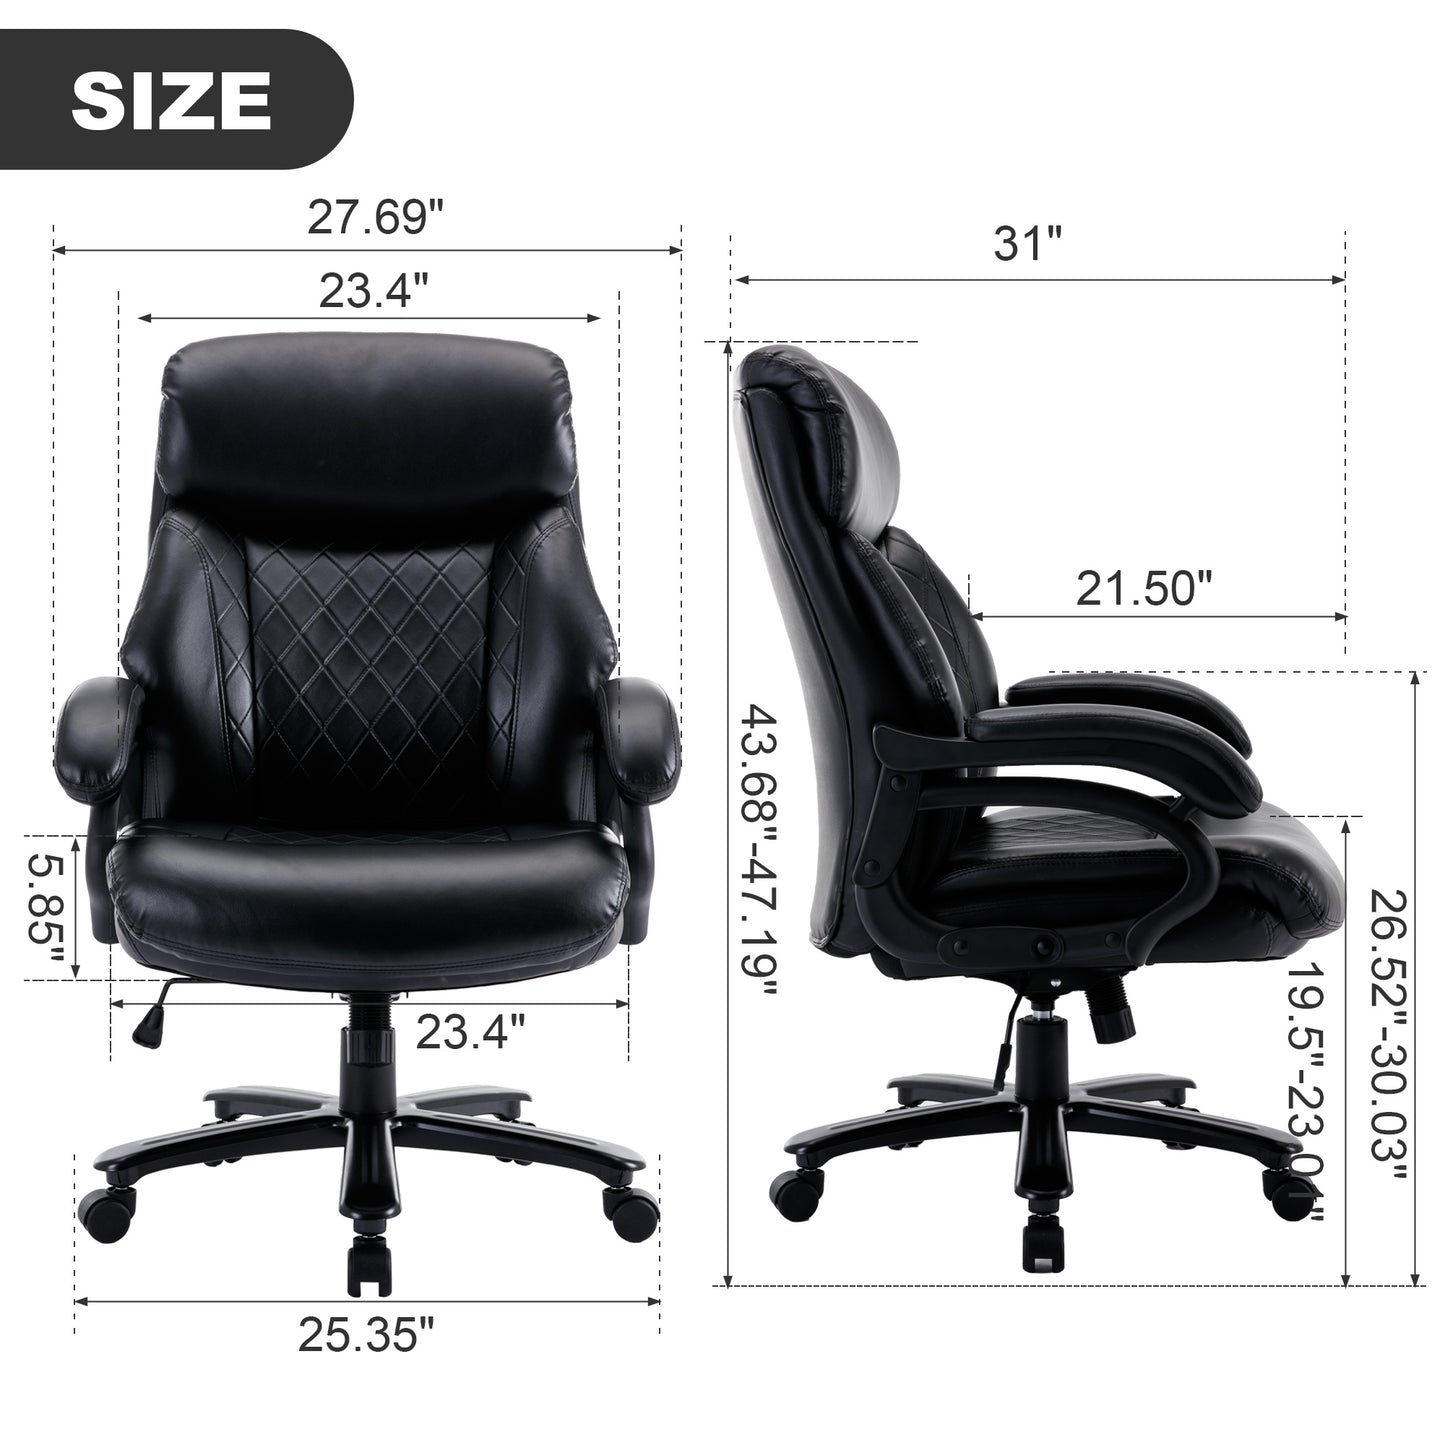 Leather office Chair ; PU faux leather;  till function 90-110 degree; black color max uploaded 400LBS